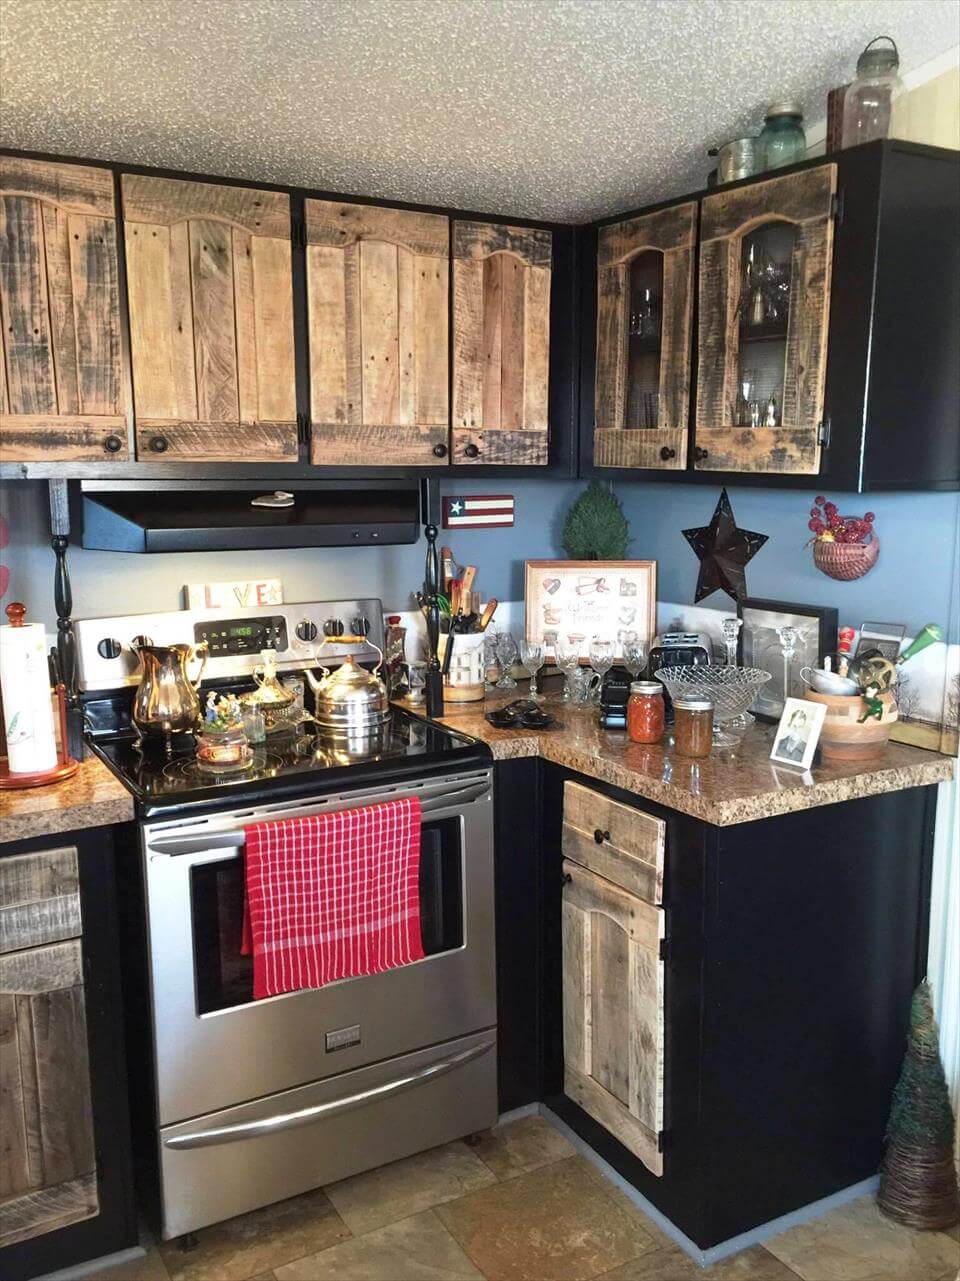 Kitchen Cabinets Using Old Pallets - 101 Pallet Ideas